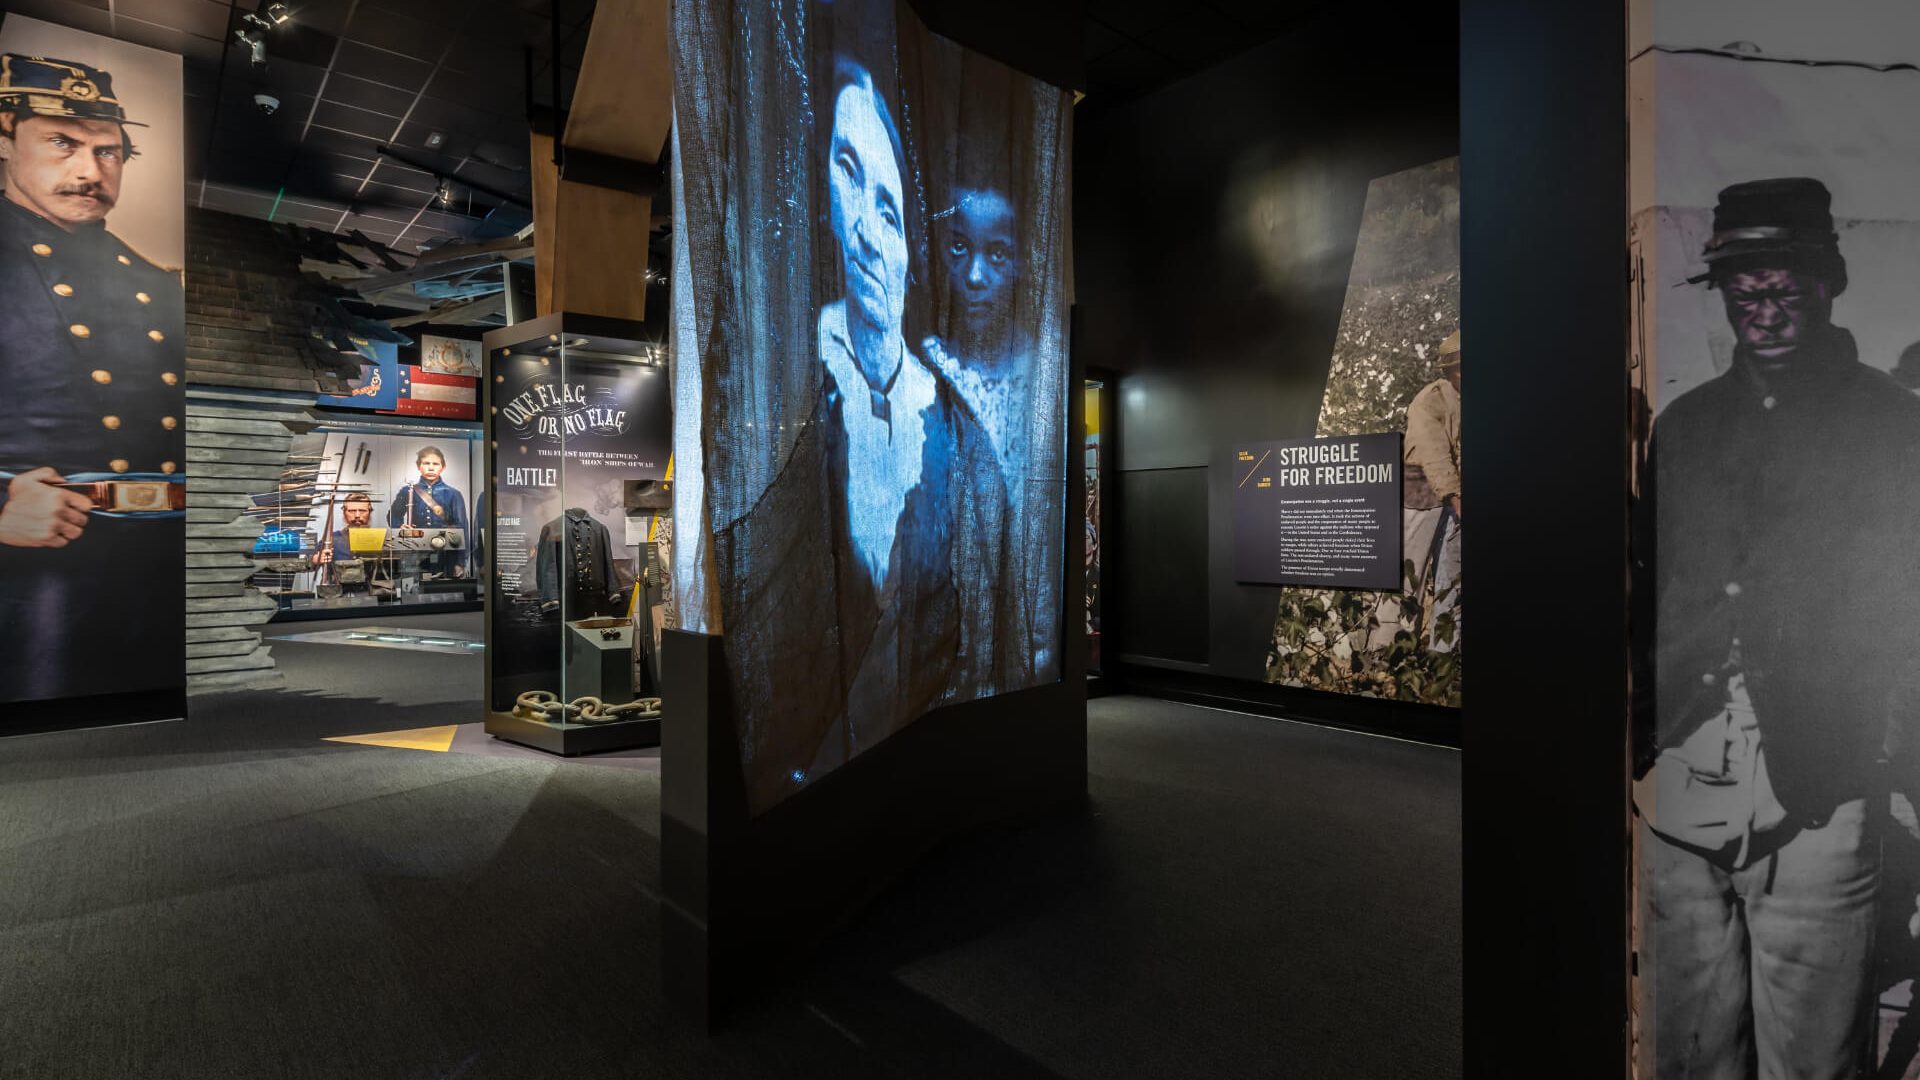 Excellence in Exhibition awarded to American Civil War Museum